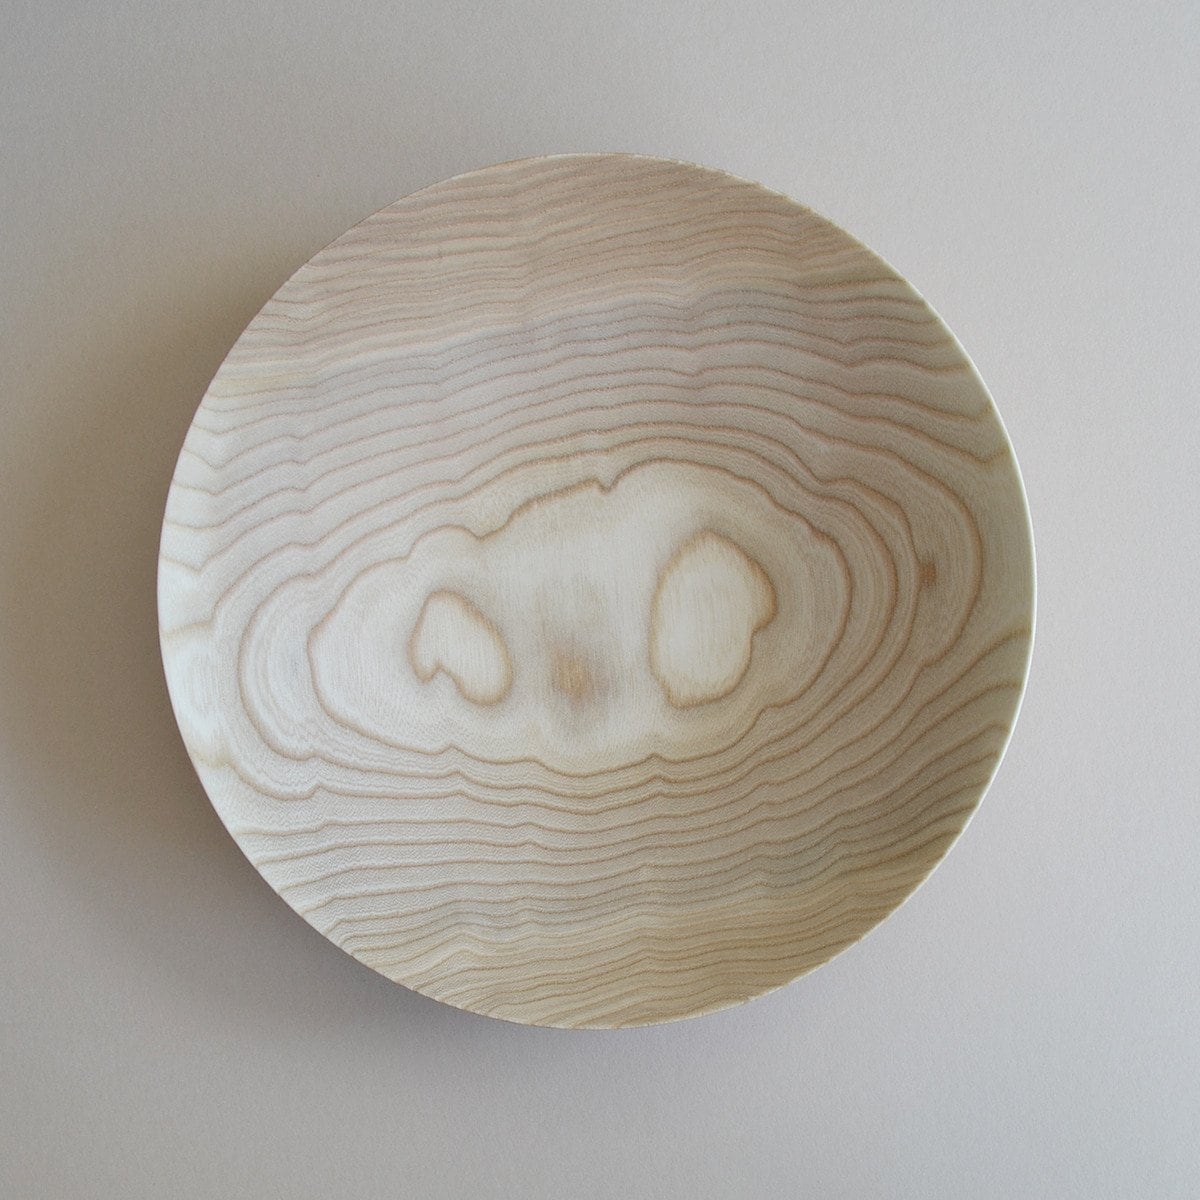 A Kihachi Wooden Plate - Small with a pattern on it.